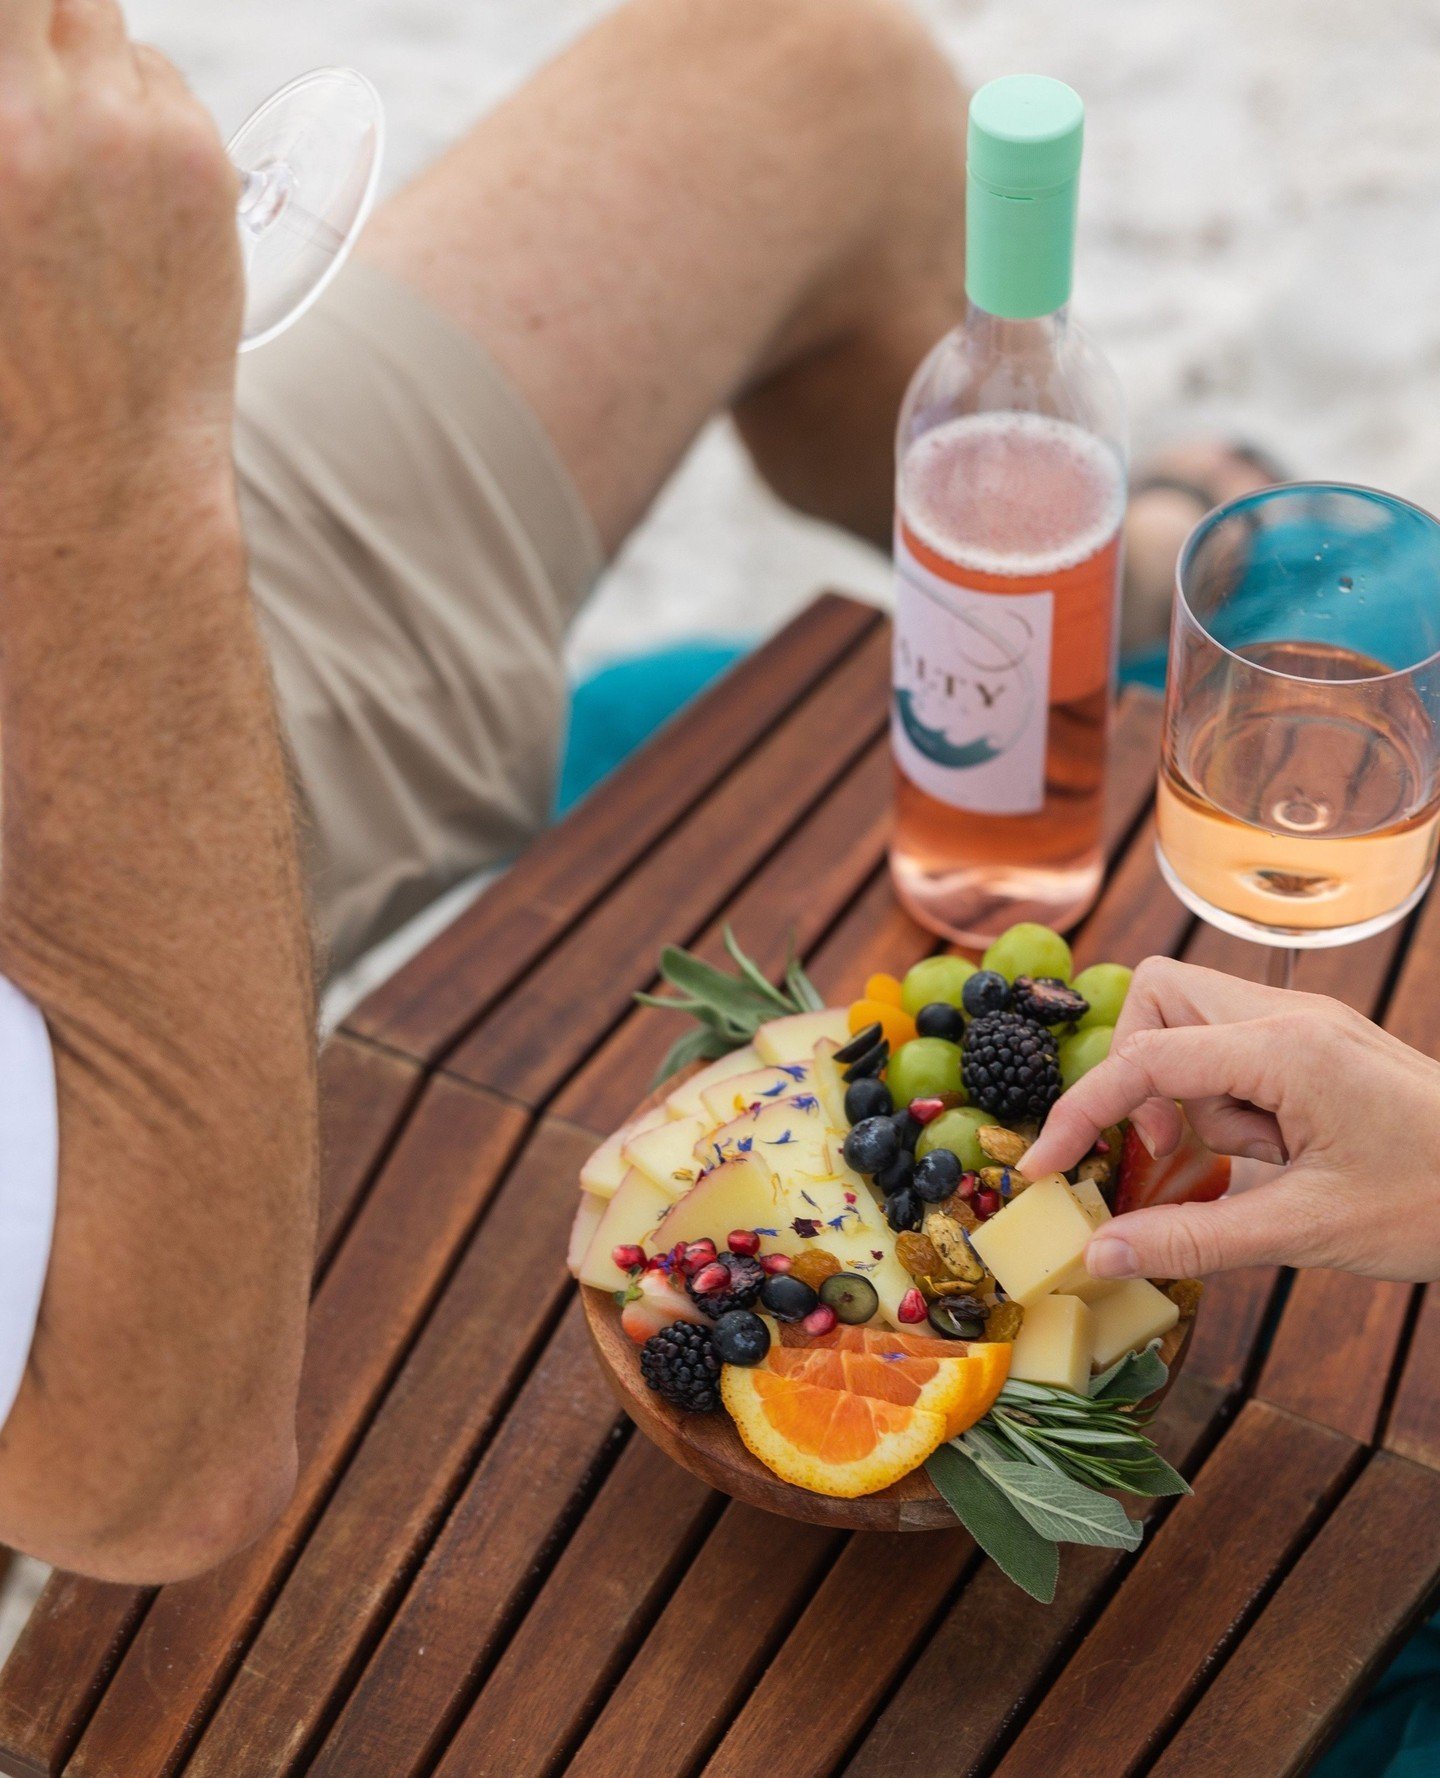 Some things just go together... like you &amp; me, @graze30a ⁠&amp; SALTY Ros&eacute; 💞⁠
⁠
⁠
🥂 Shop at saltybeverages.com ⁠
⁠
Beach-safe Ros&eacute; in a full-size, luxe plastic bottle | #sipsalty #winelover #30a #rosewine #floridalife #frenchwine 